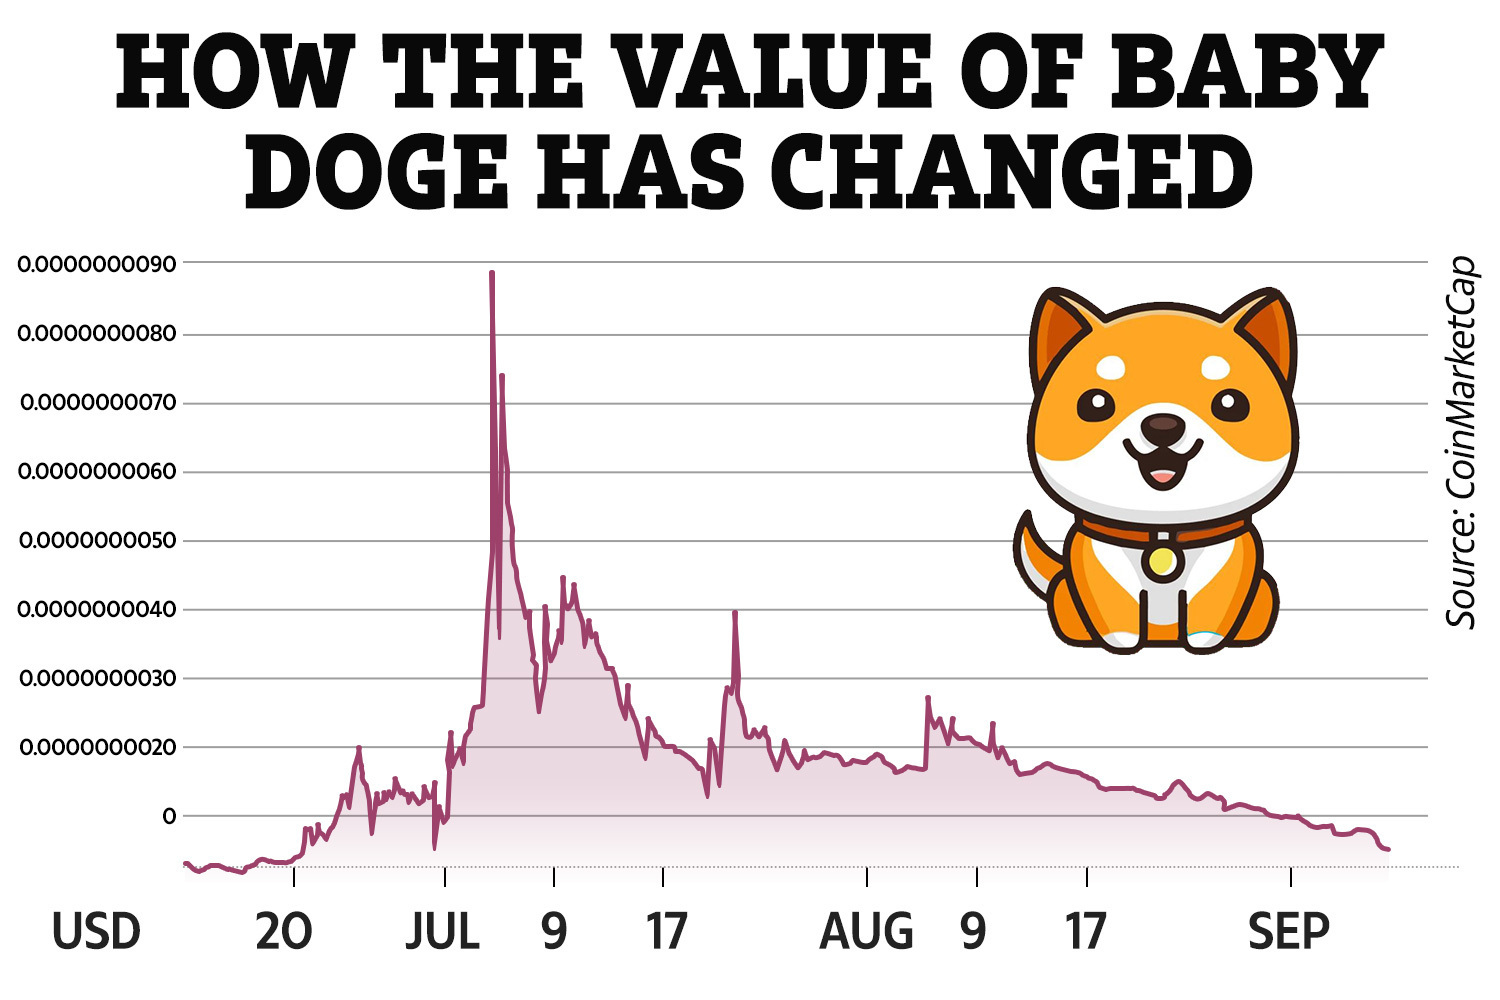 Shiba Inu and Dogecoin Price Prediction: ChatGPT Forecasts Massive Gains For Both